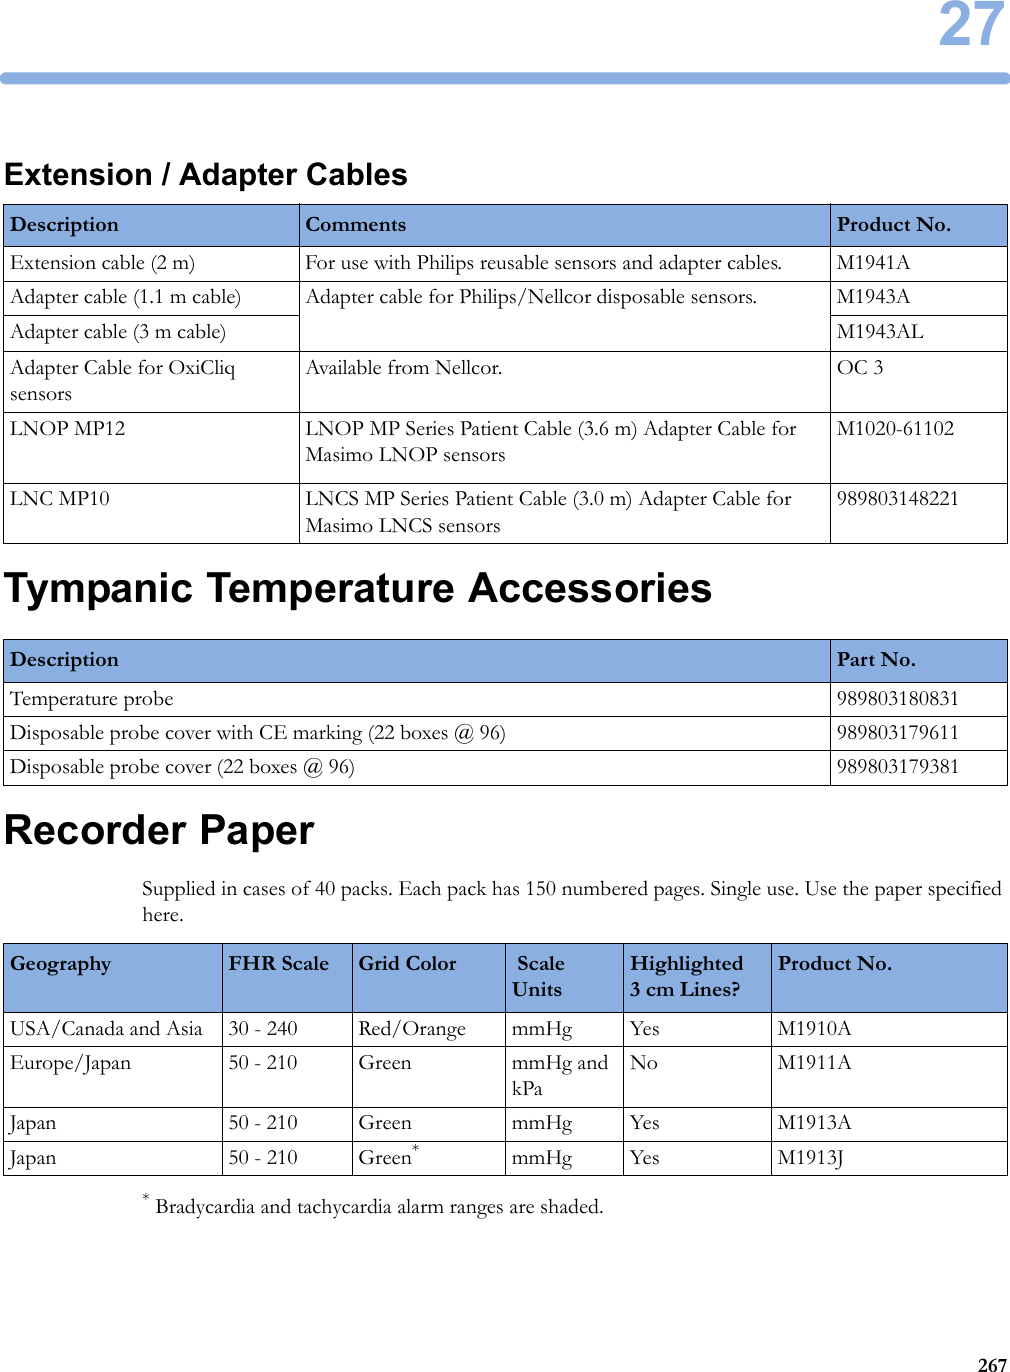 27267Extension / Adapter CablesTympanic Temperature AccessoriesRecorder PaperSupplied in cases of 40 packs. Each pack has 150 numbered pages. Single use. Use the paper specified here.* Bradycardia and tachycardia alarm ranges are shaded.Description Comments Product No.Extension cable (2 m) For use with Philips reusable sensors and adapter cables. M1941AAdapter cable (1.1 m cable) Adapter cable for Philips/Nellcor disposable sensors. M1943AAdapter cable (3 m cable) M1943ALAdapter Cable for OxiCliq sensorsAvailable from Nellcor. OC 3LNOP MP12 LNOP MP Series Patient Cable (3.6 m) Adapter Cable for Masimo LNOP sensorsM1020-61102LNC MP10 LNCS MP Series Patient Cable (3.0 m) Adapter Cable for Masimo LNCS sensors989803148221Description Part No.Temperature probe 989803180831Disposable probe cover with CE marking (22 boxes @ 96) 989803179611Disposable probe cover (22 boxes @ 96) 989803179381Geography FHR Scale Grid Color  Scale UnitsHighlighted 3cm Lines?Product No.USA/Canada and Asia 30 - 240 Red/Orange mmHg Yes M1910AEurope/Japan 50 - 210 Green mmHg and kPaNo M1911AJapan 50 - 210 Green mmHg Yes M1913AJapan 50 - 210 Green*mmHg Yes M1913J